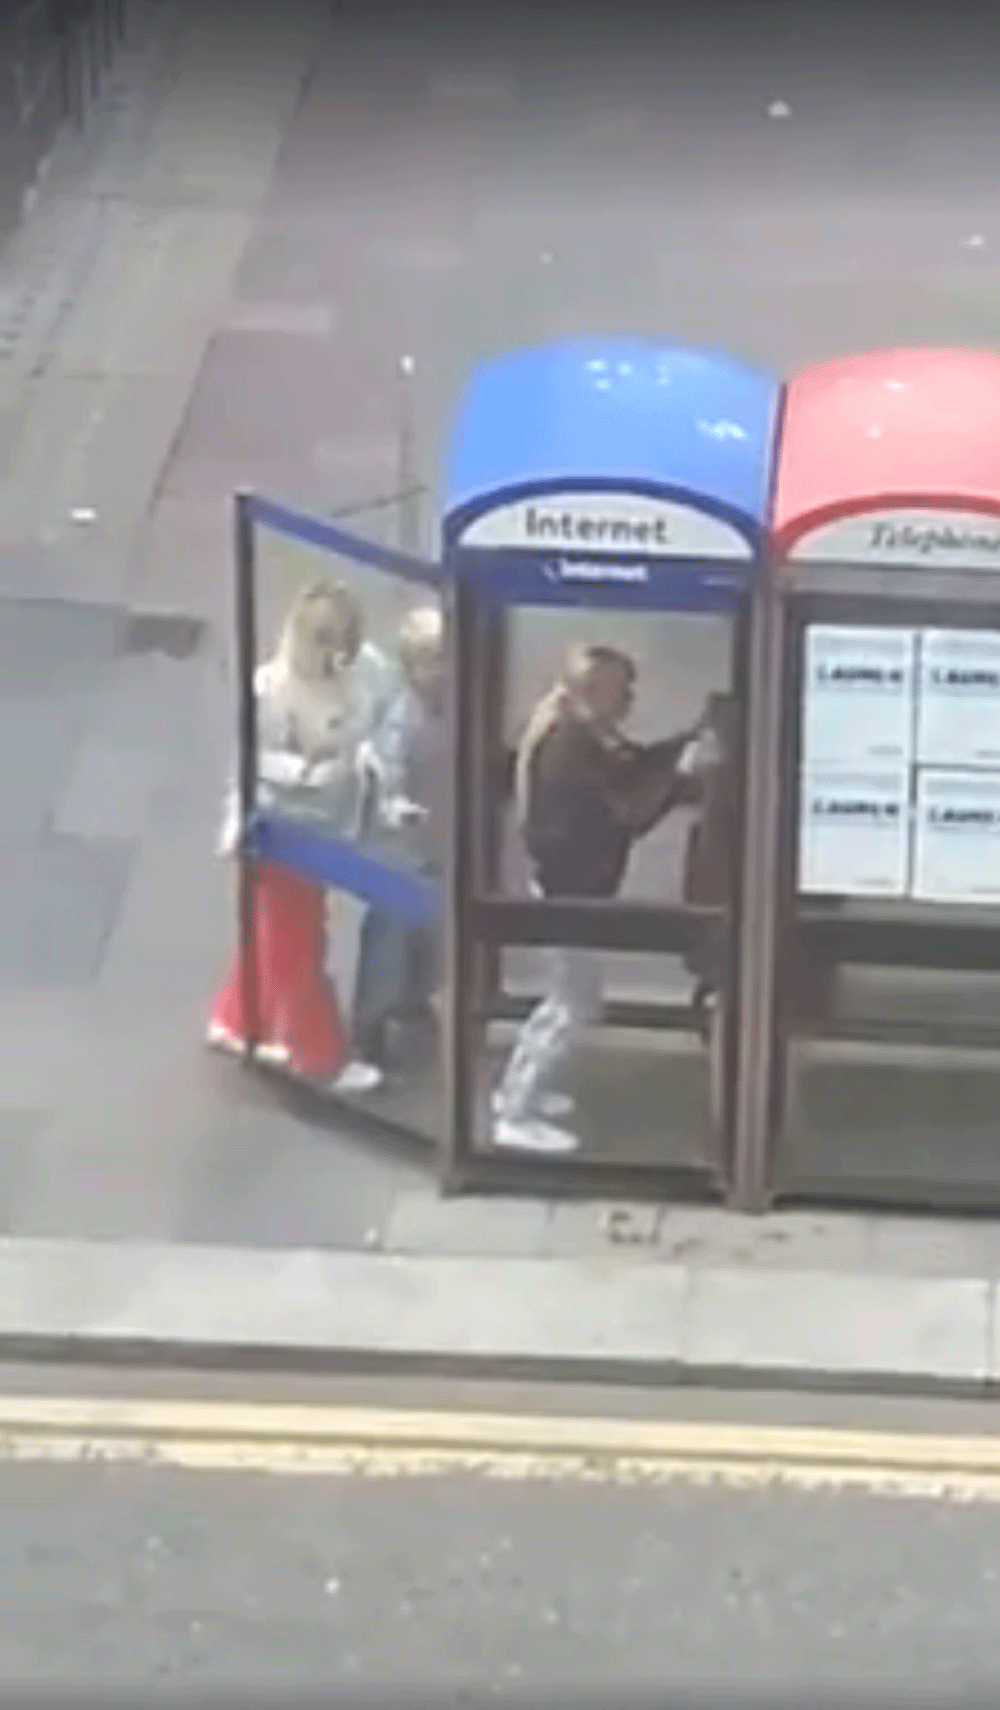 The woman and the boy take turns to grab the frame of the phone box with both hands so they can kick it